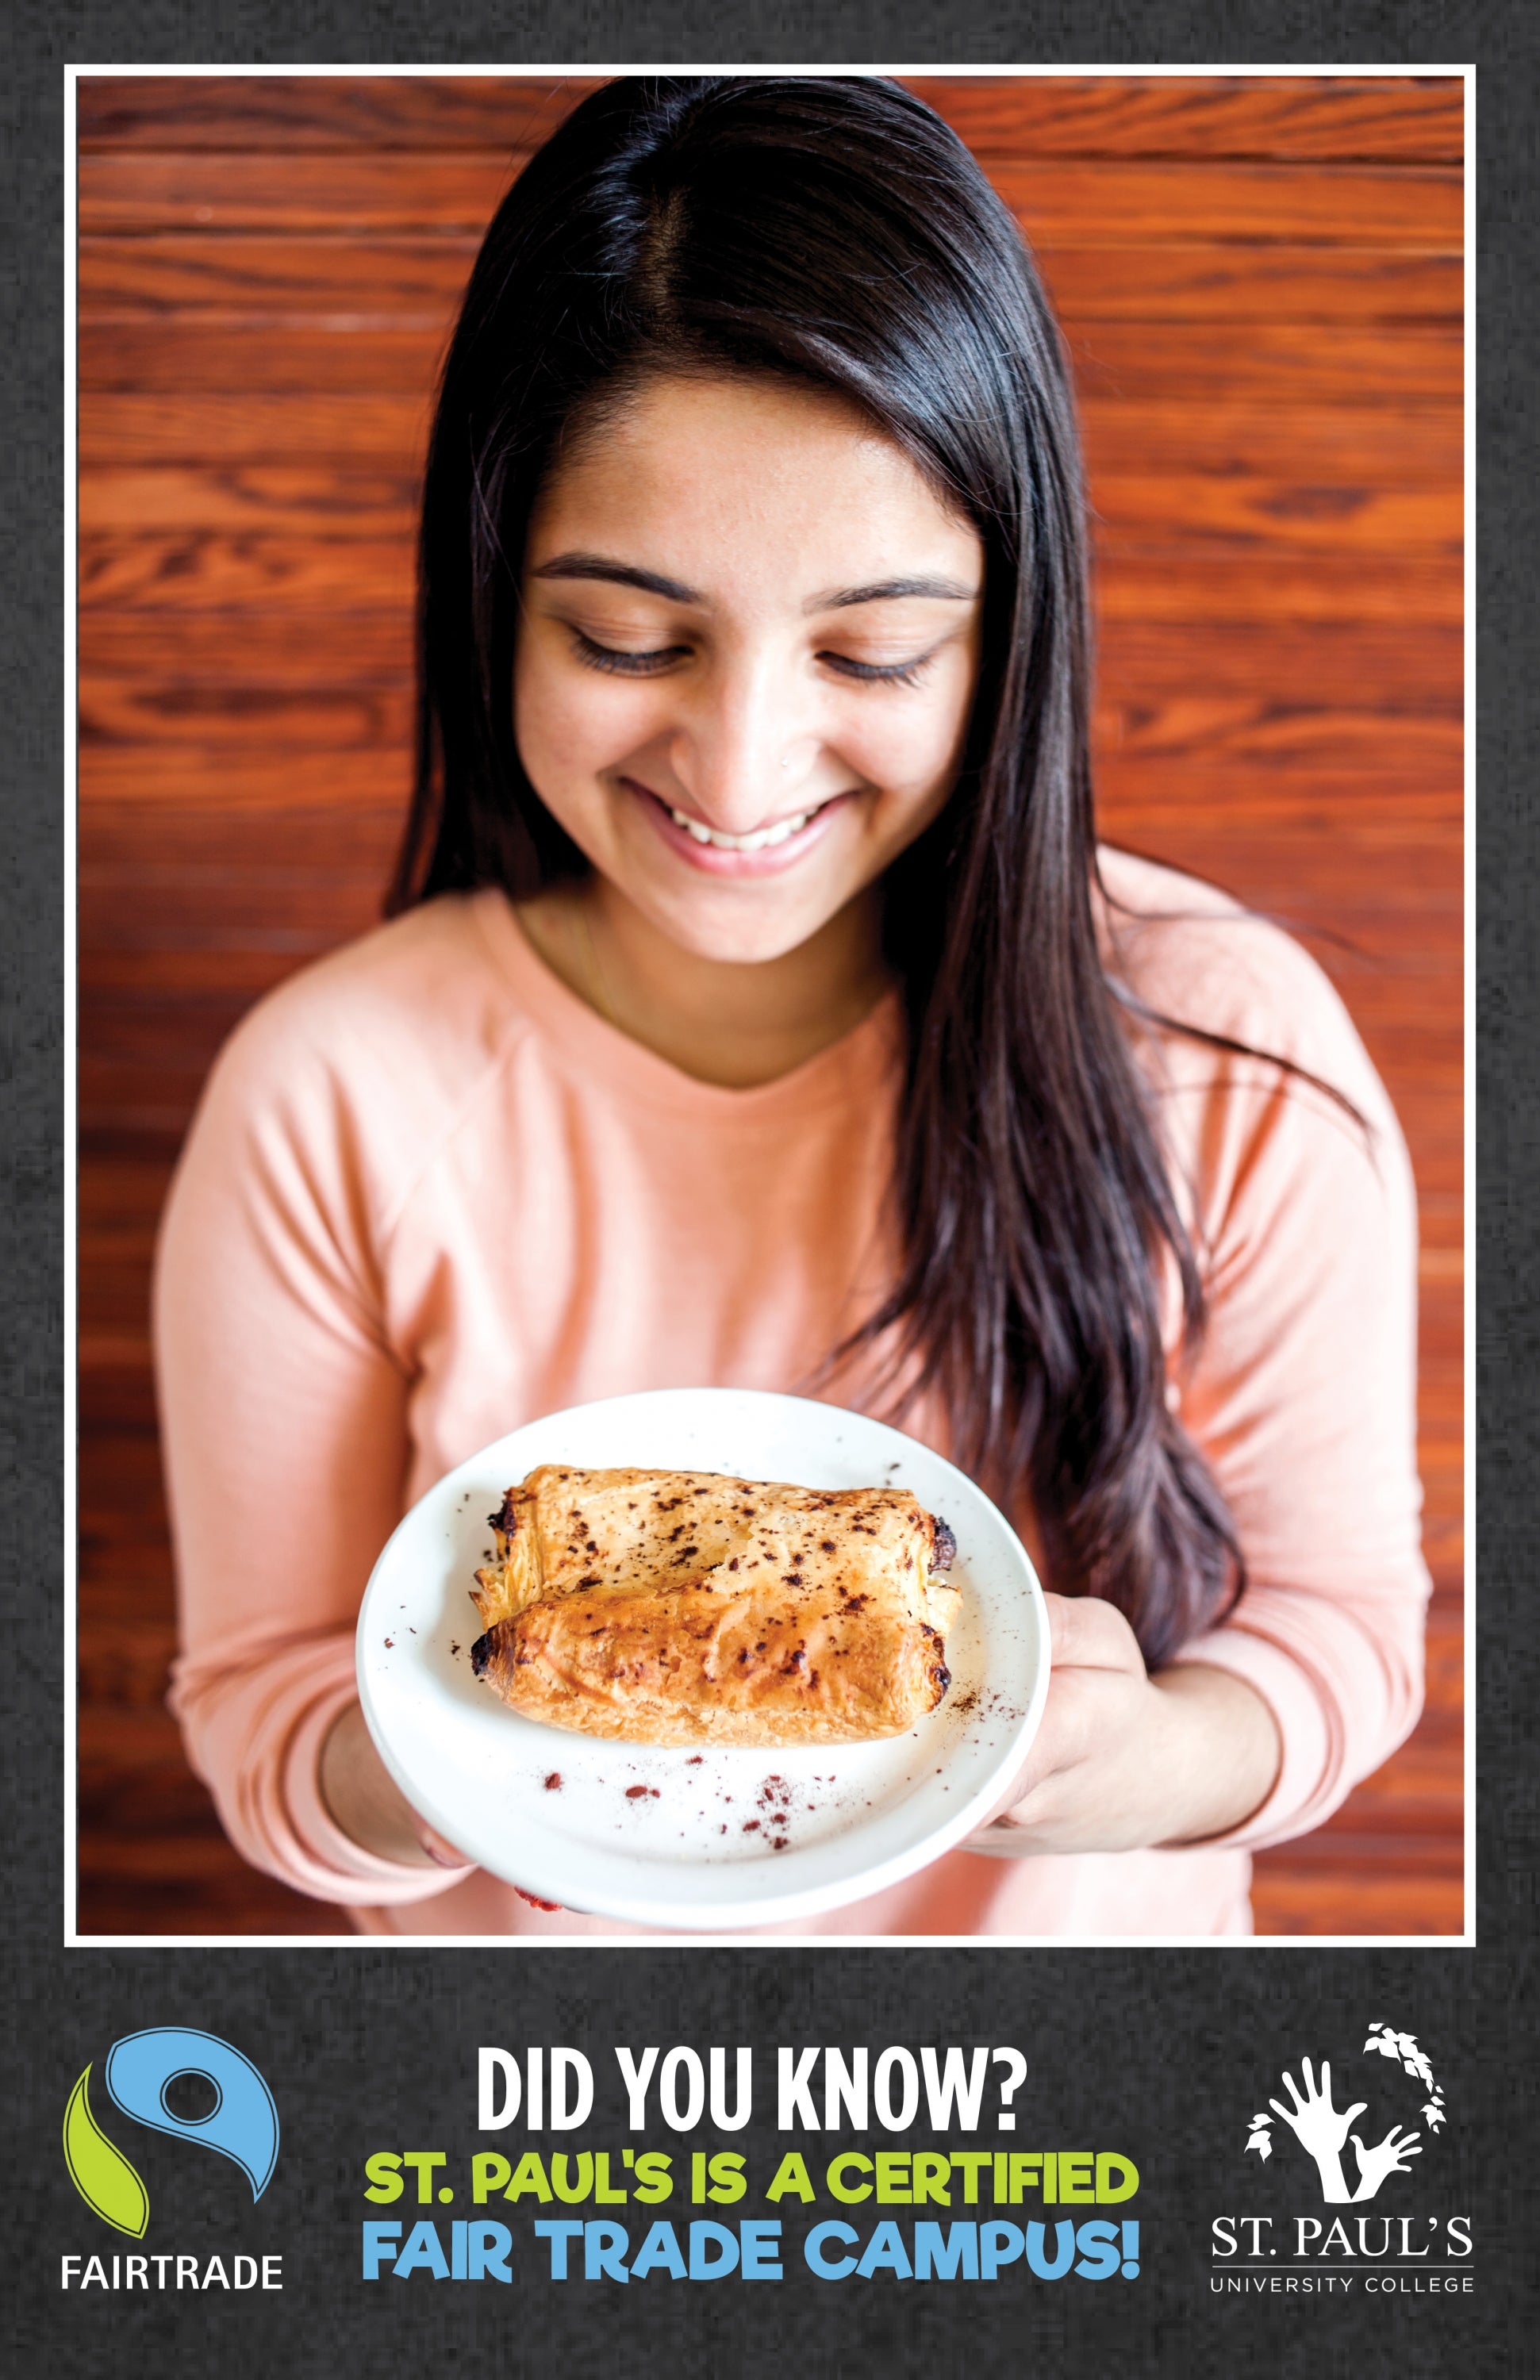 Poster of female student holding Fair Trade chocolate croissant